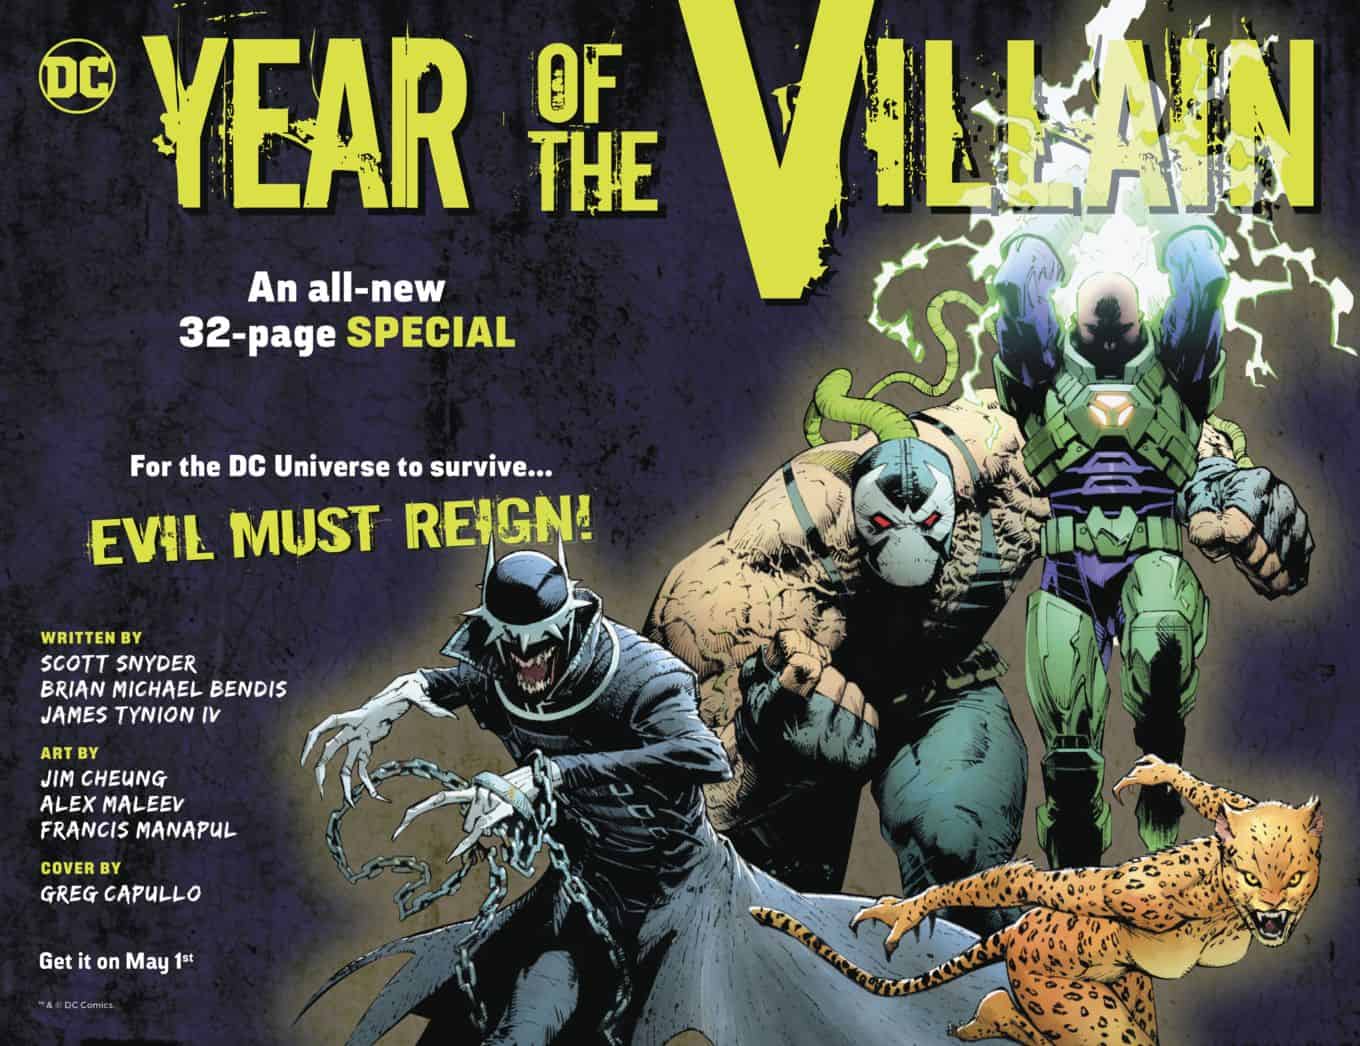 DC'S YEAR OF THE VILLAIN #1